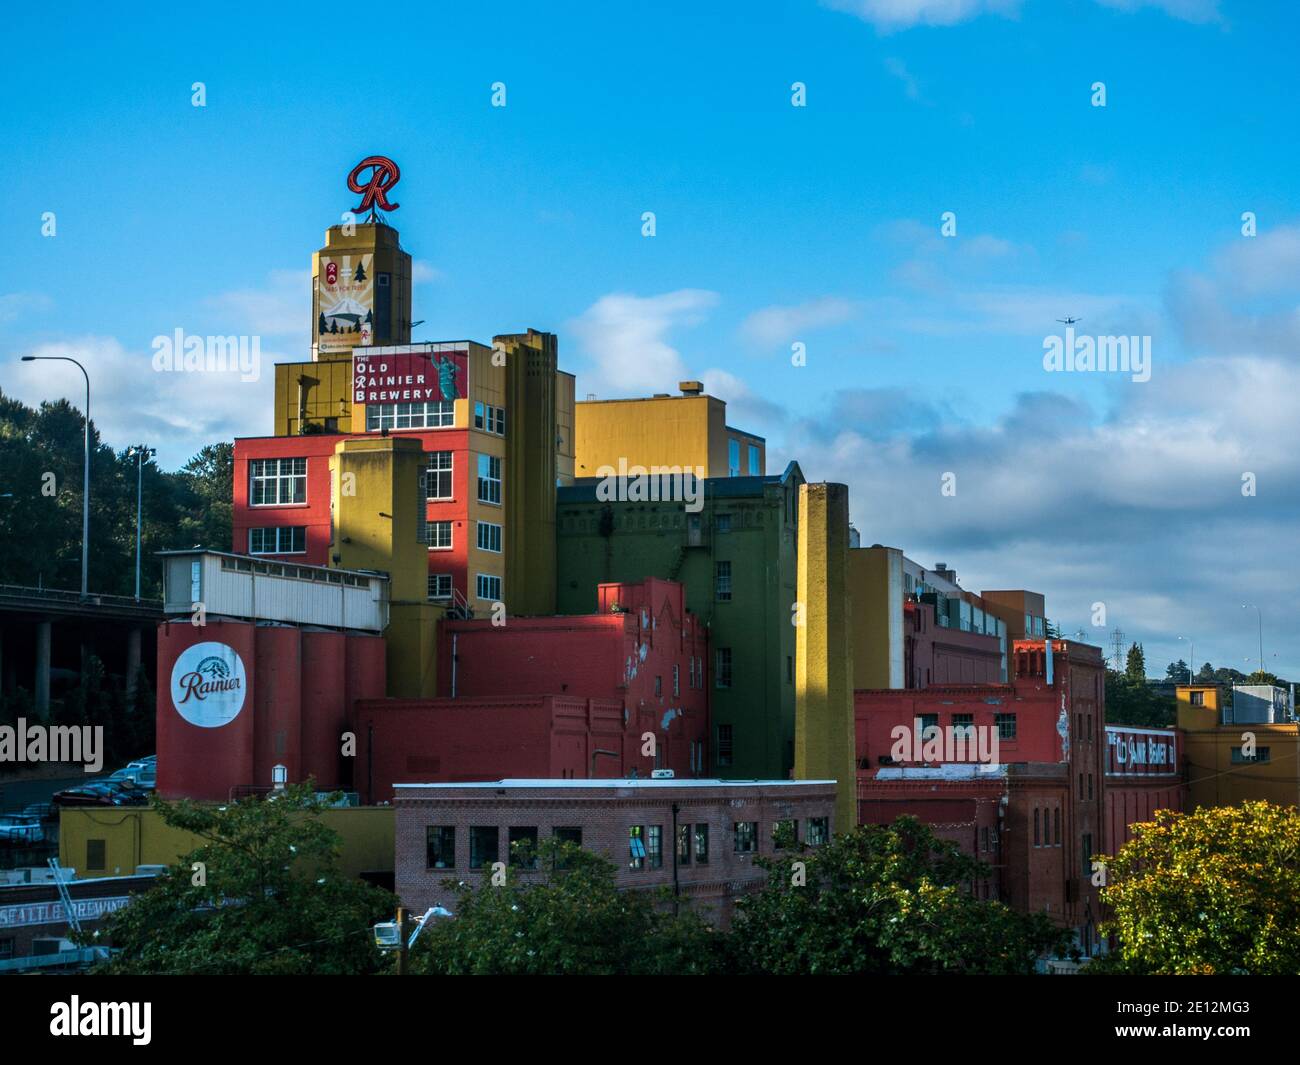 Seattle's iconic Old Rainier Brewery located on the west side of I-5, north of the Spokane St viaduct. Stock Photo